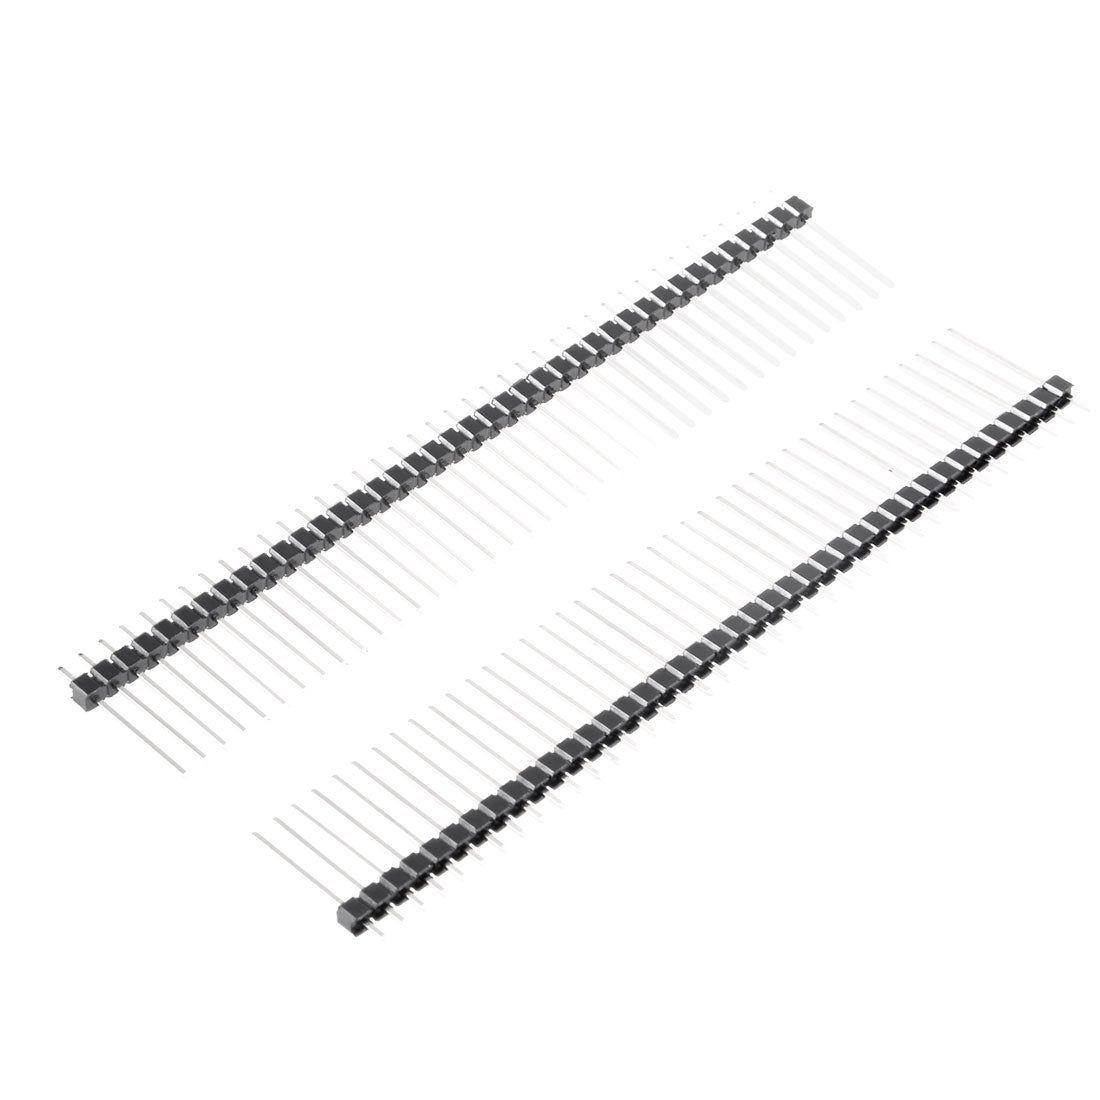 uxcell Uxcell 30Pcs 2.54mm Pitch 40-Pin 19mm Length Single Row Straight Connector Pin Header Strip for Arduino Prototype Shield